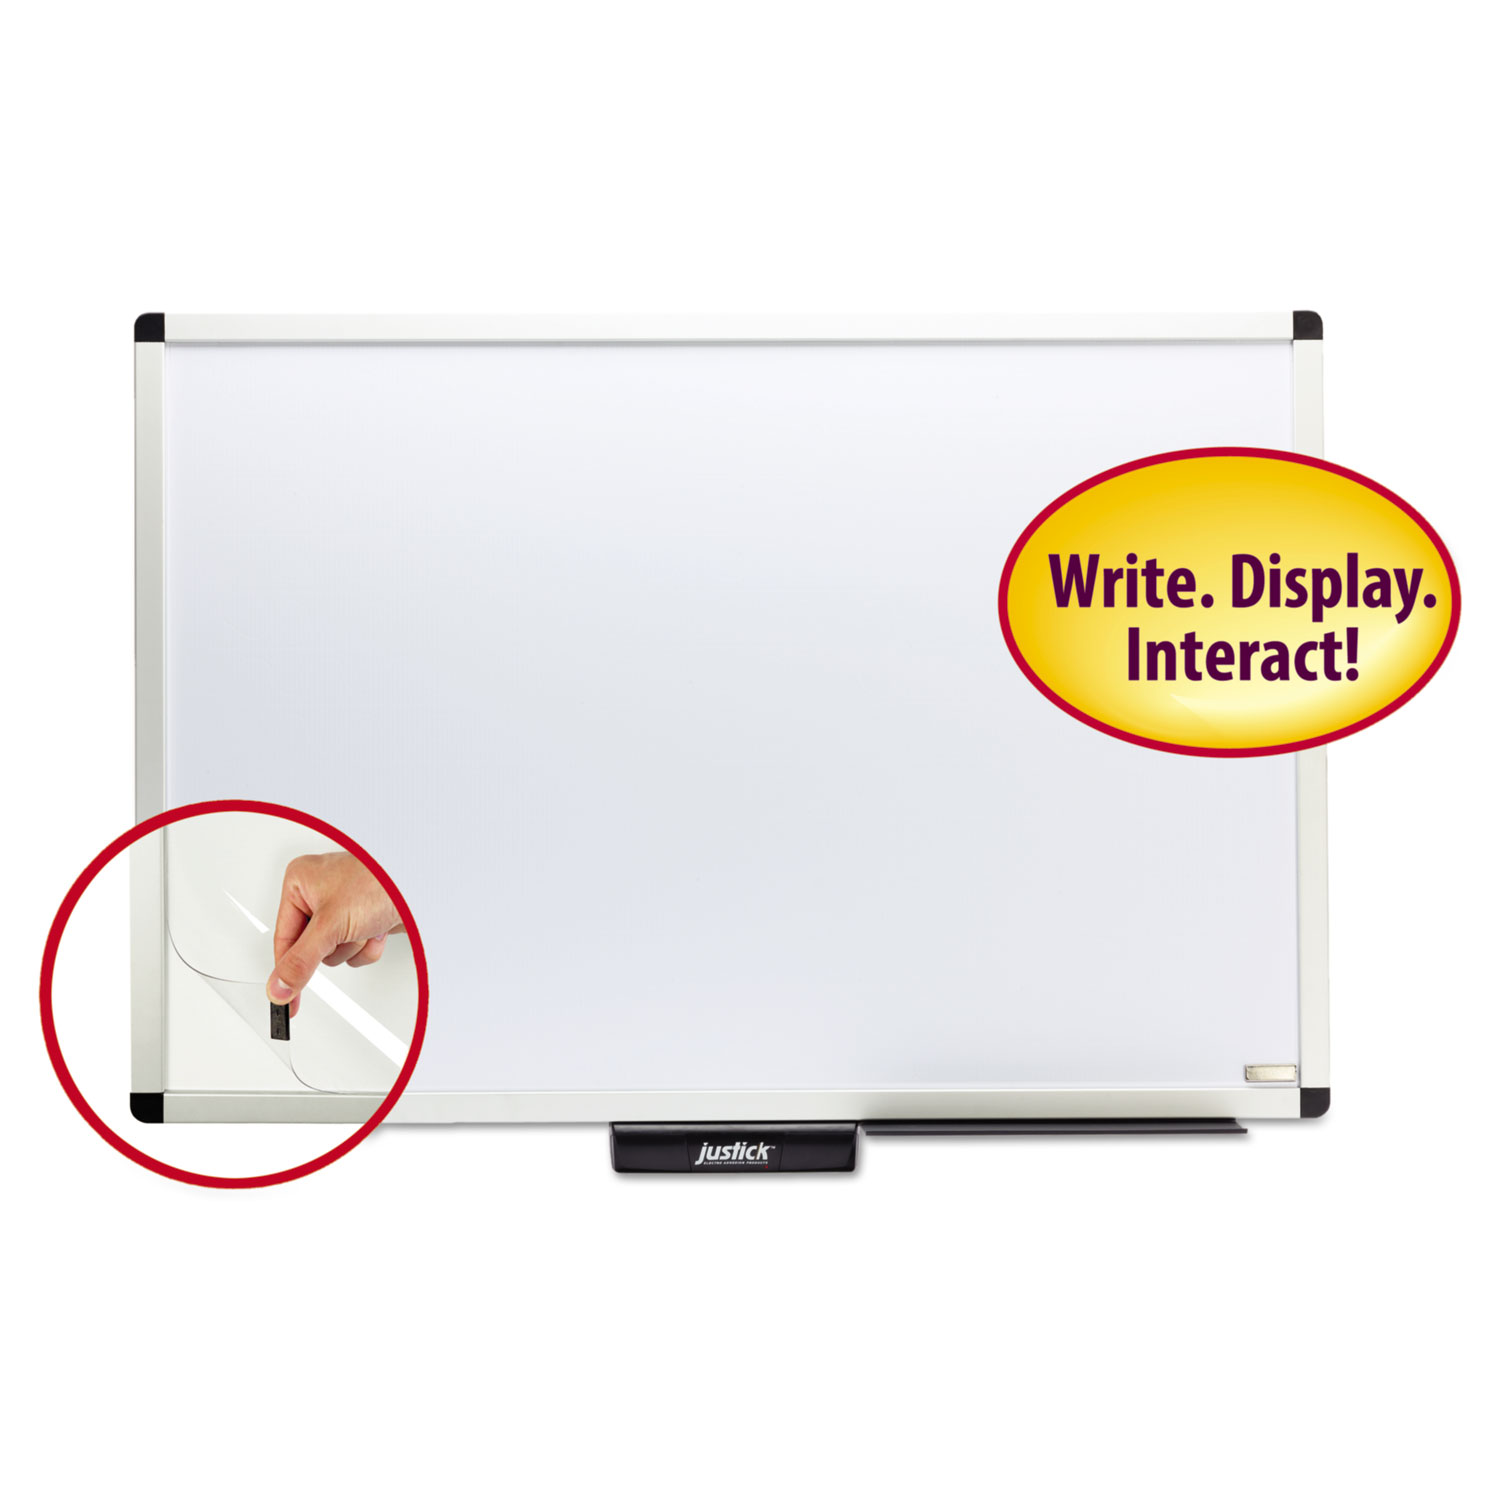  Smead 02571 Justick by Smead Dry-Erase Board with Frame, 36 x 24, White (SMD02571) 